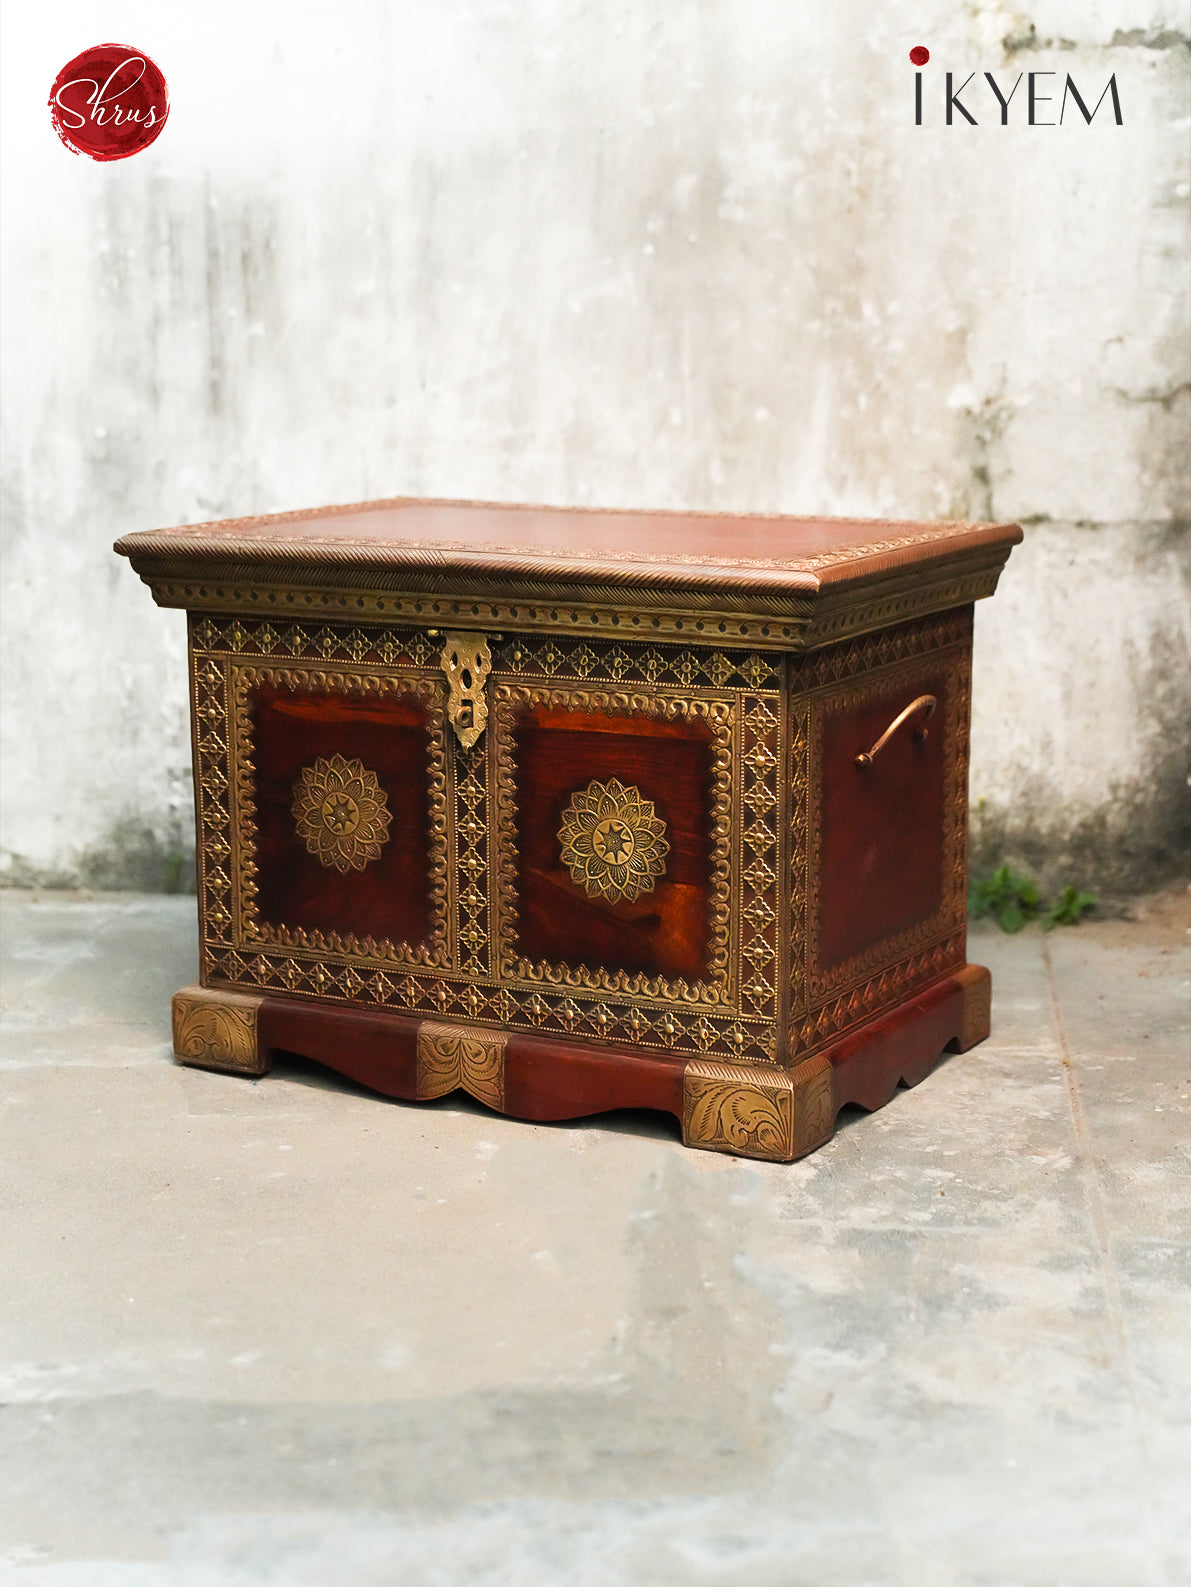 Brass embellished wooden trunk box